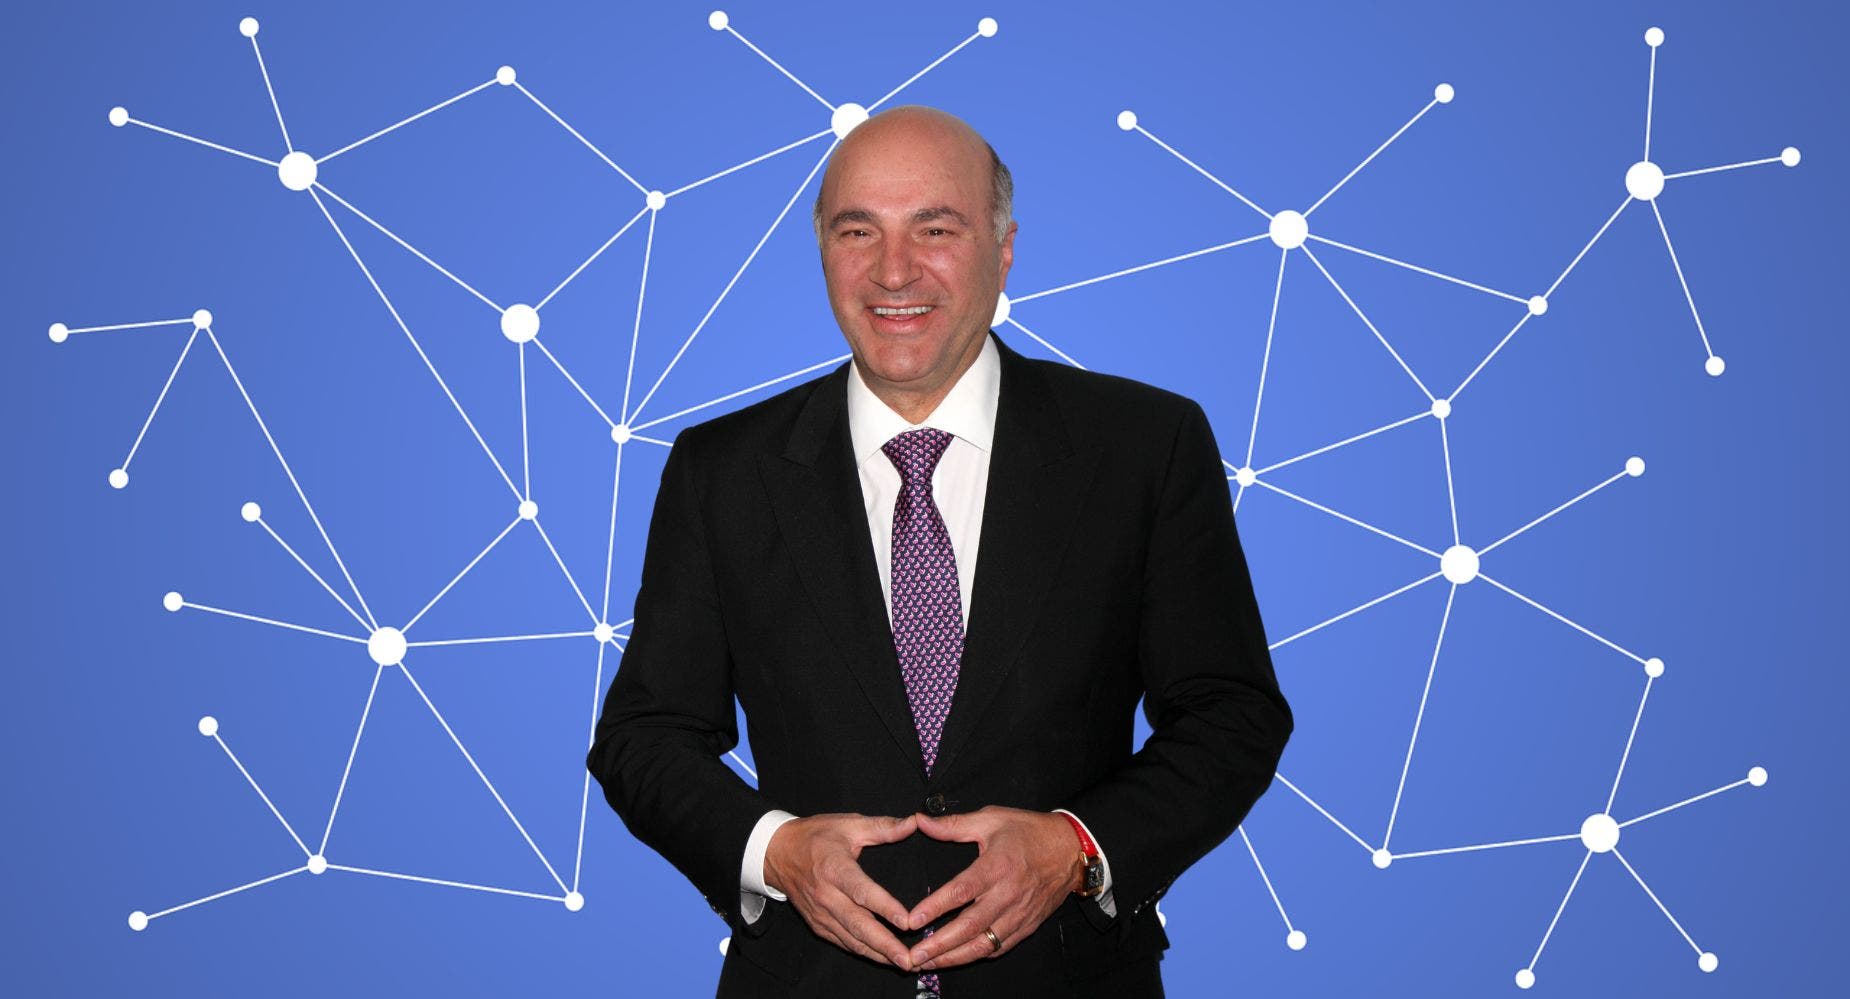 Kevin O'Leary On Why Blockchain Will Reveal Truth Behind FTX Collapse: 'It's Going To Come Clean'